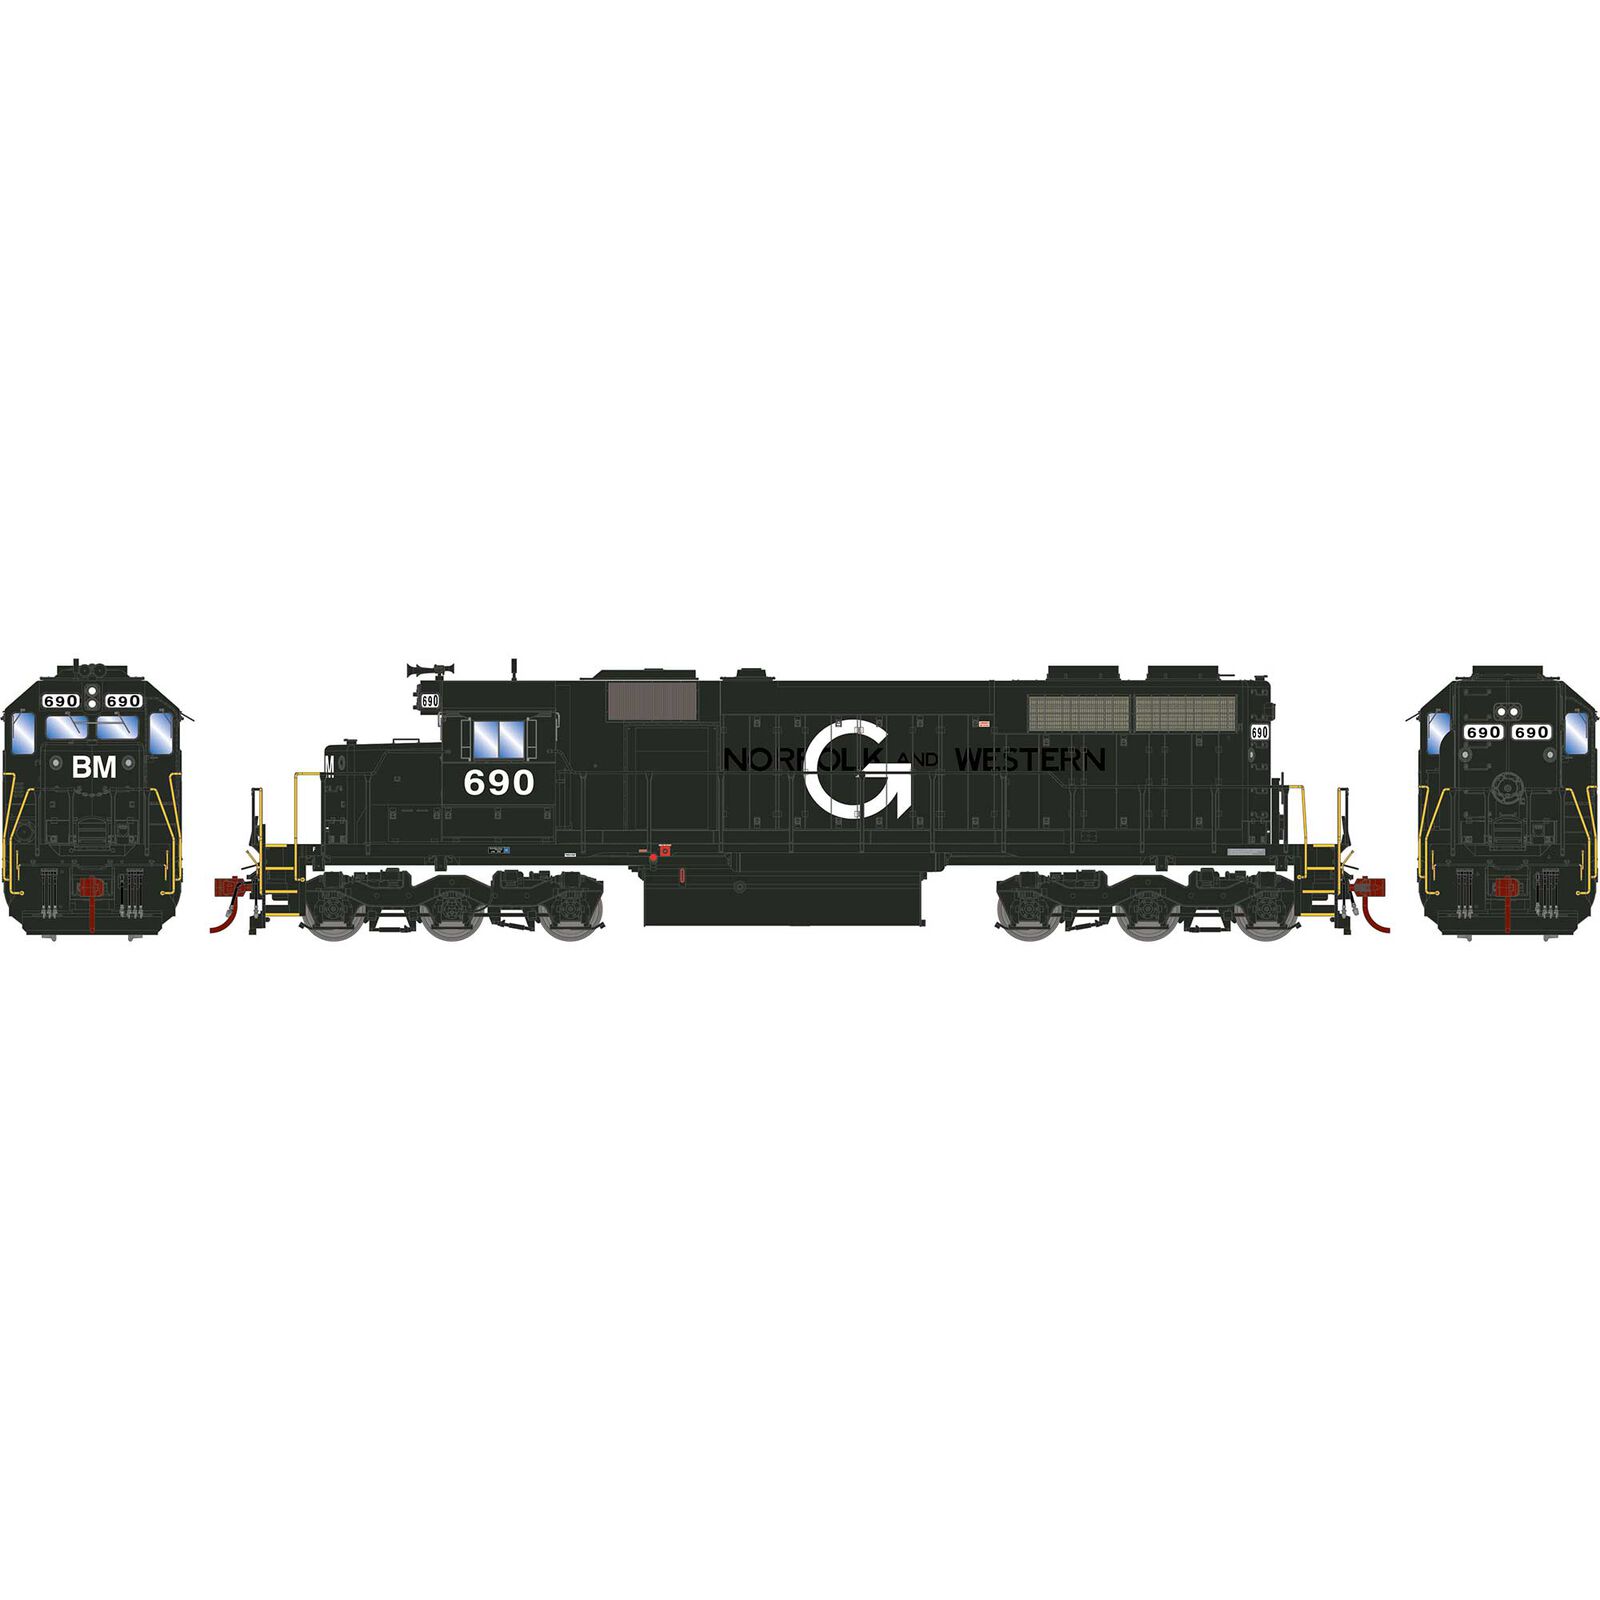 HO RTR SD39 with DCC & Sound, B&M #690